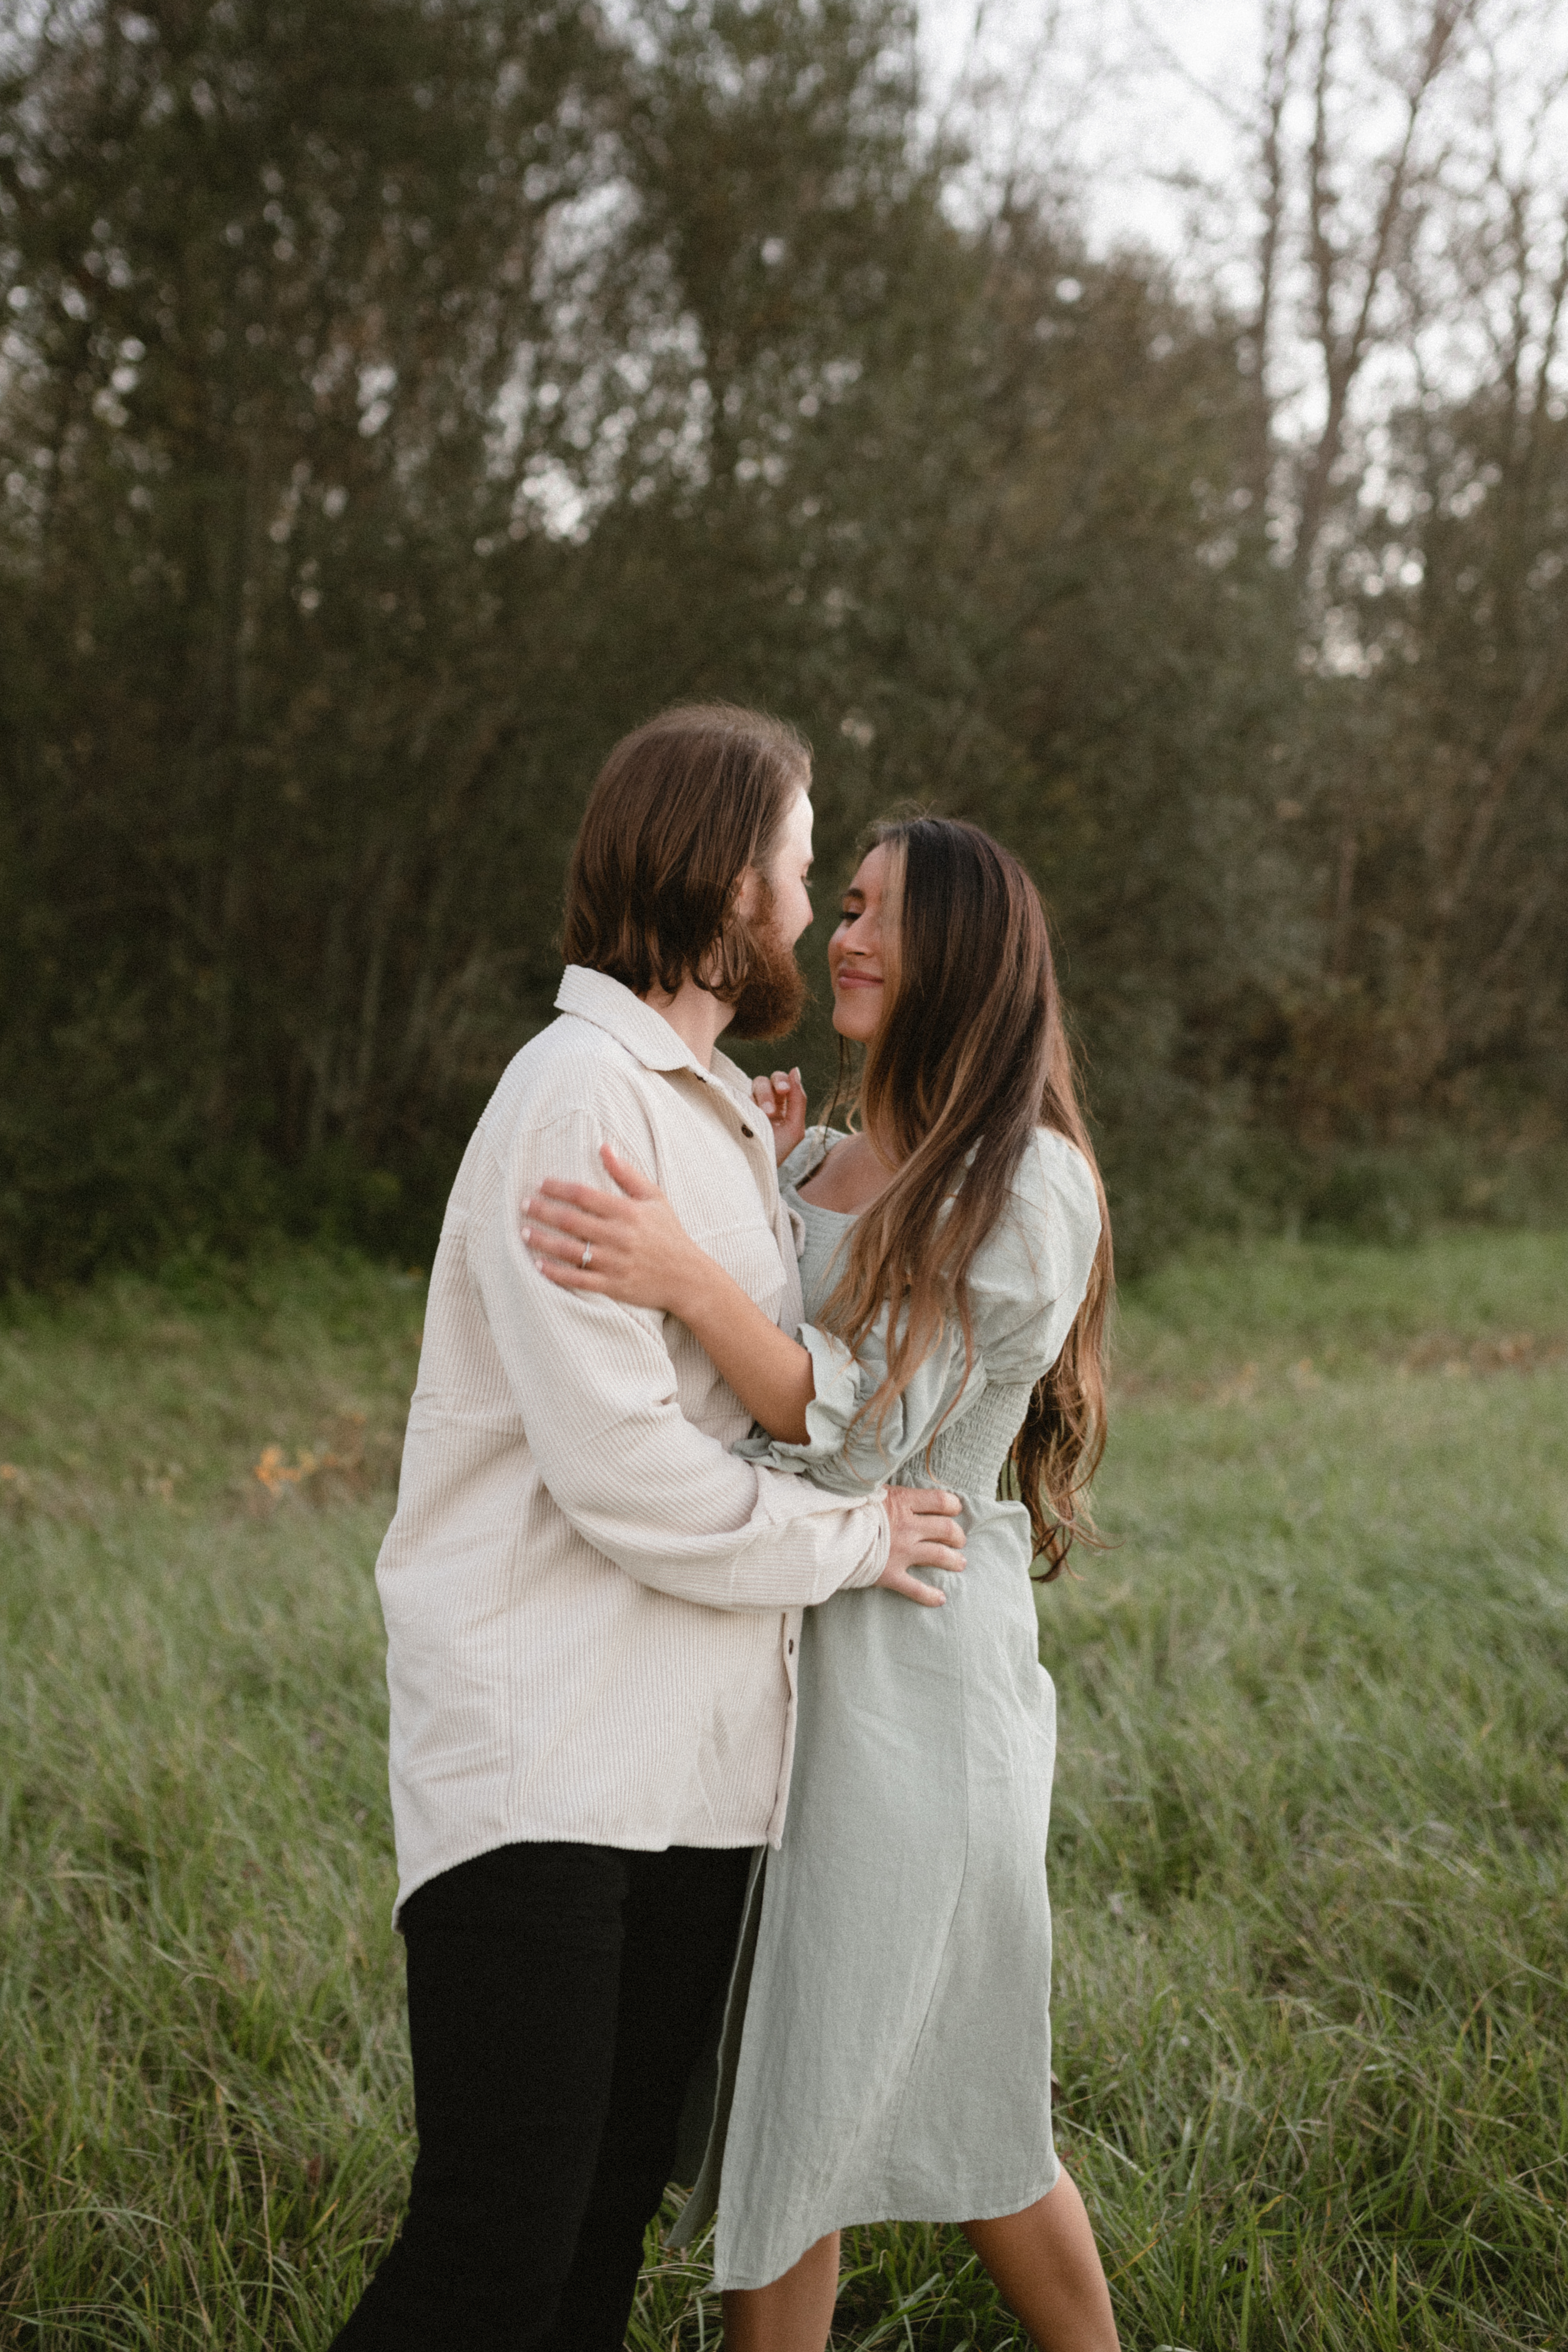 Loved working with Megan for our engagement photos! She really listens to what you want, and captures moments beautifully! Highly recommend working with her. Can’t wait for her to shoot our wedding! - Jena & Mitch